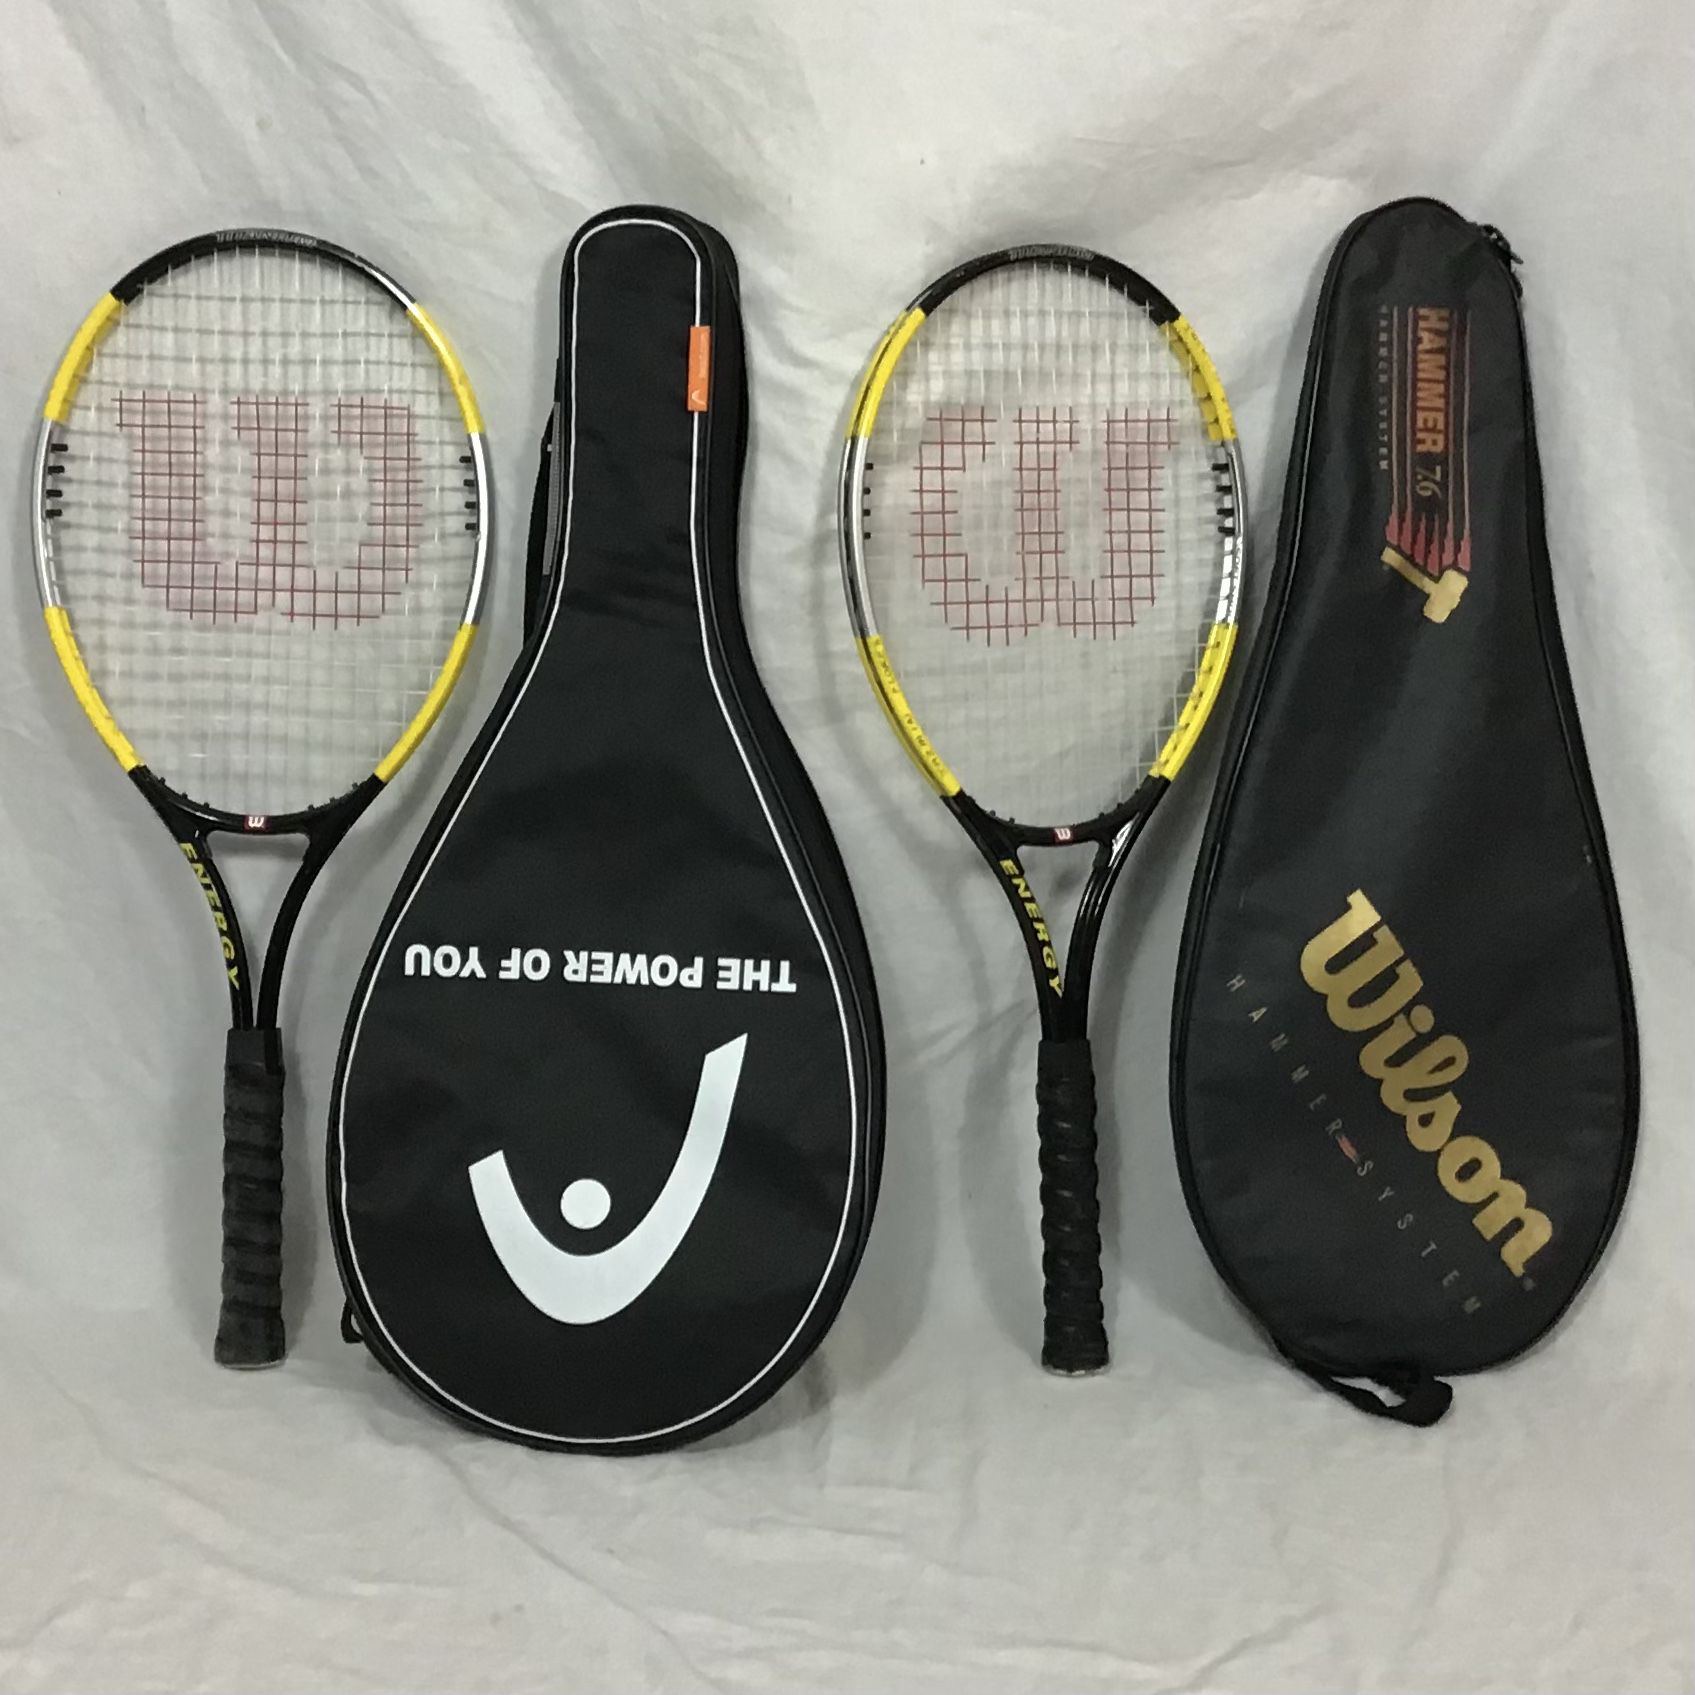 Tennis Rackets With Cases Like New 25 For The Pair